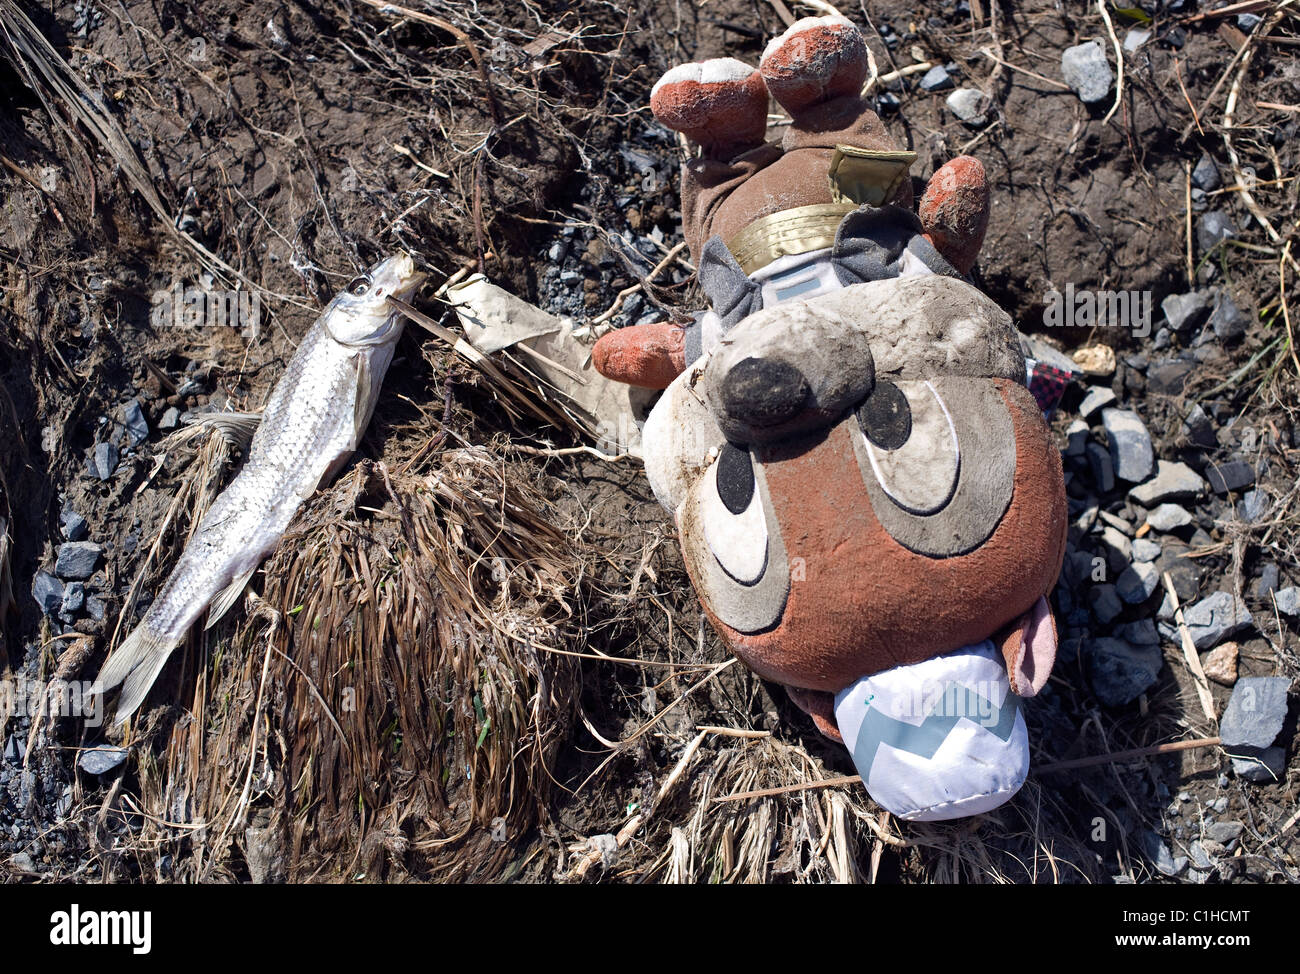 A dead fish and a child's cuddly toy lie in the dirt following the mega tsunami and quake in the Onagawa district of Ishinomaki Stock Photo